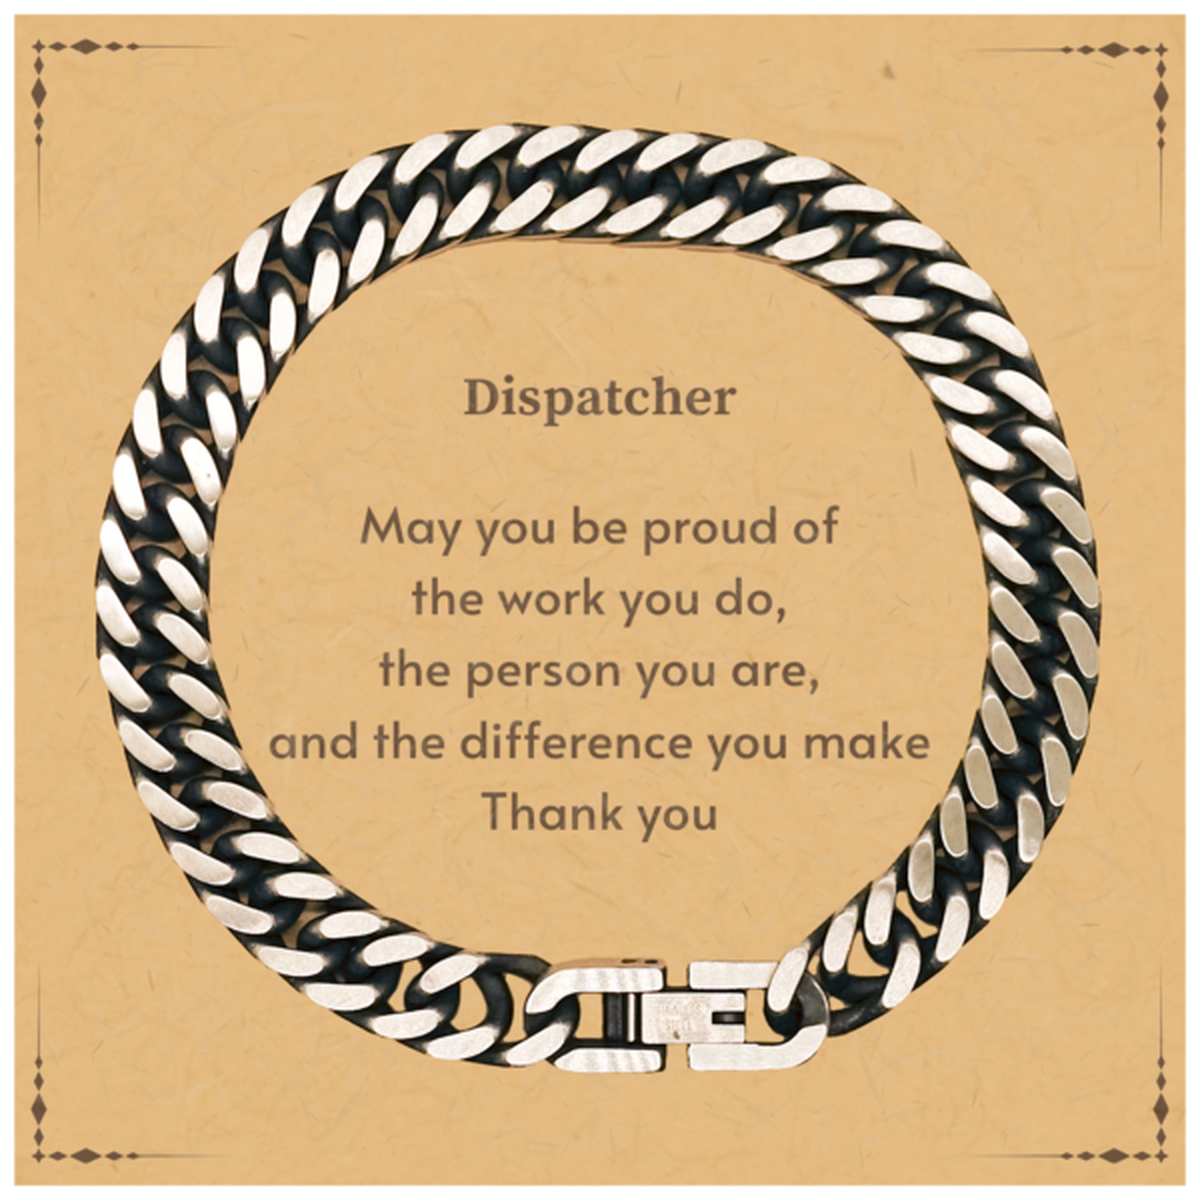 Heartwarming Cuban Link Chain Bracelet Retirement Coworkers Gifts for Dispatcher, Dispatcher May You be proud of the work you do, the person you are Gifts for Boss Men Women Friends